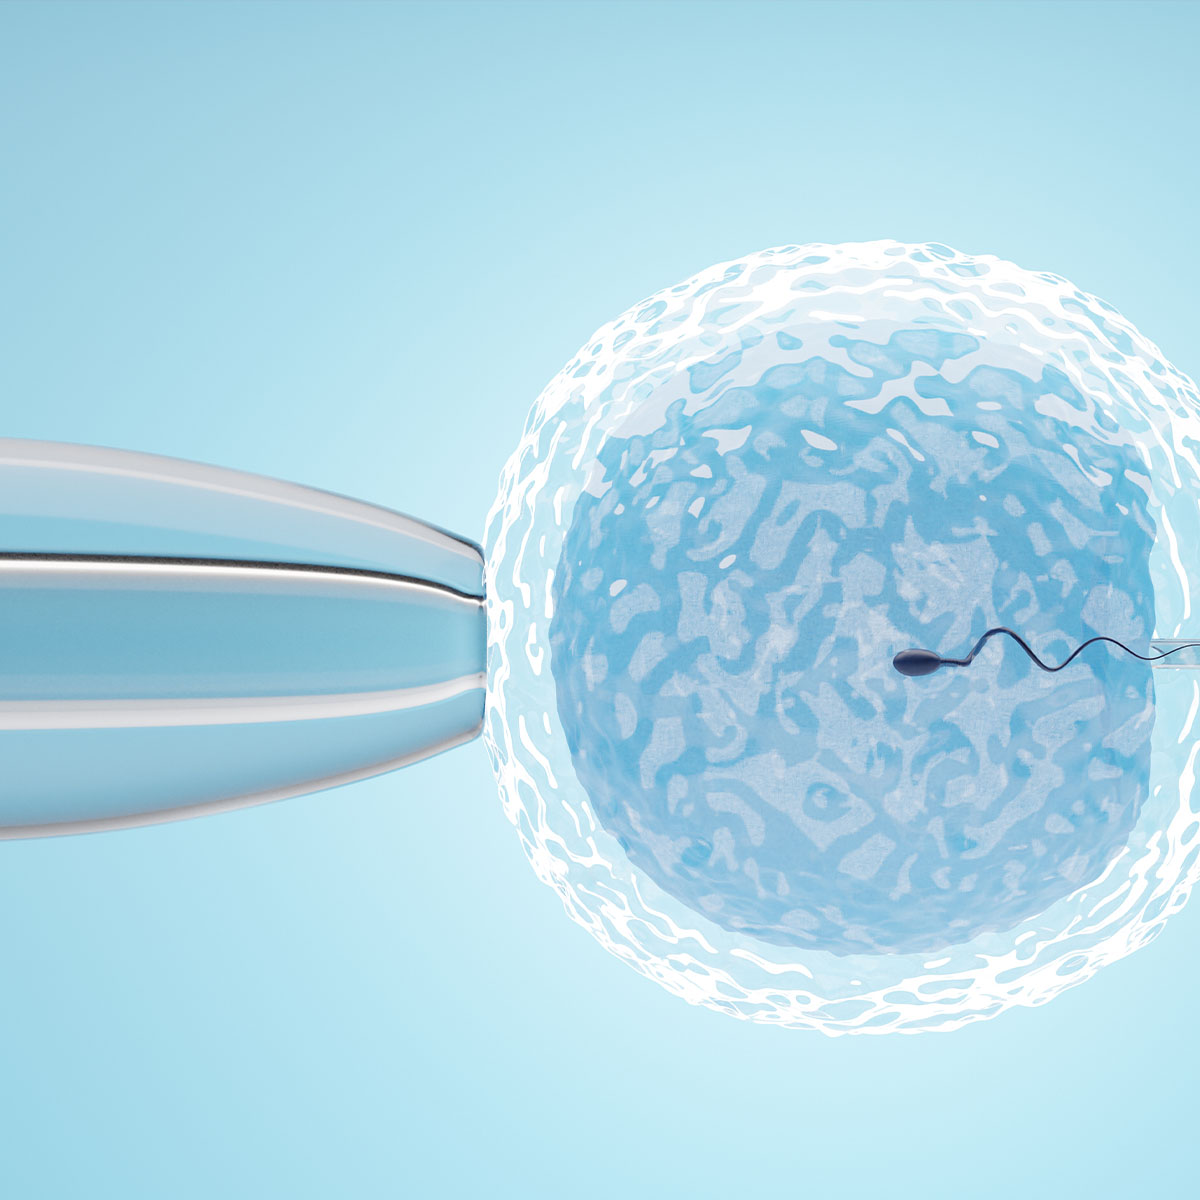 A sperm cell implanted into an egg